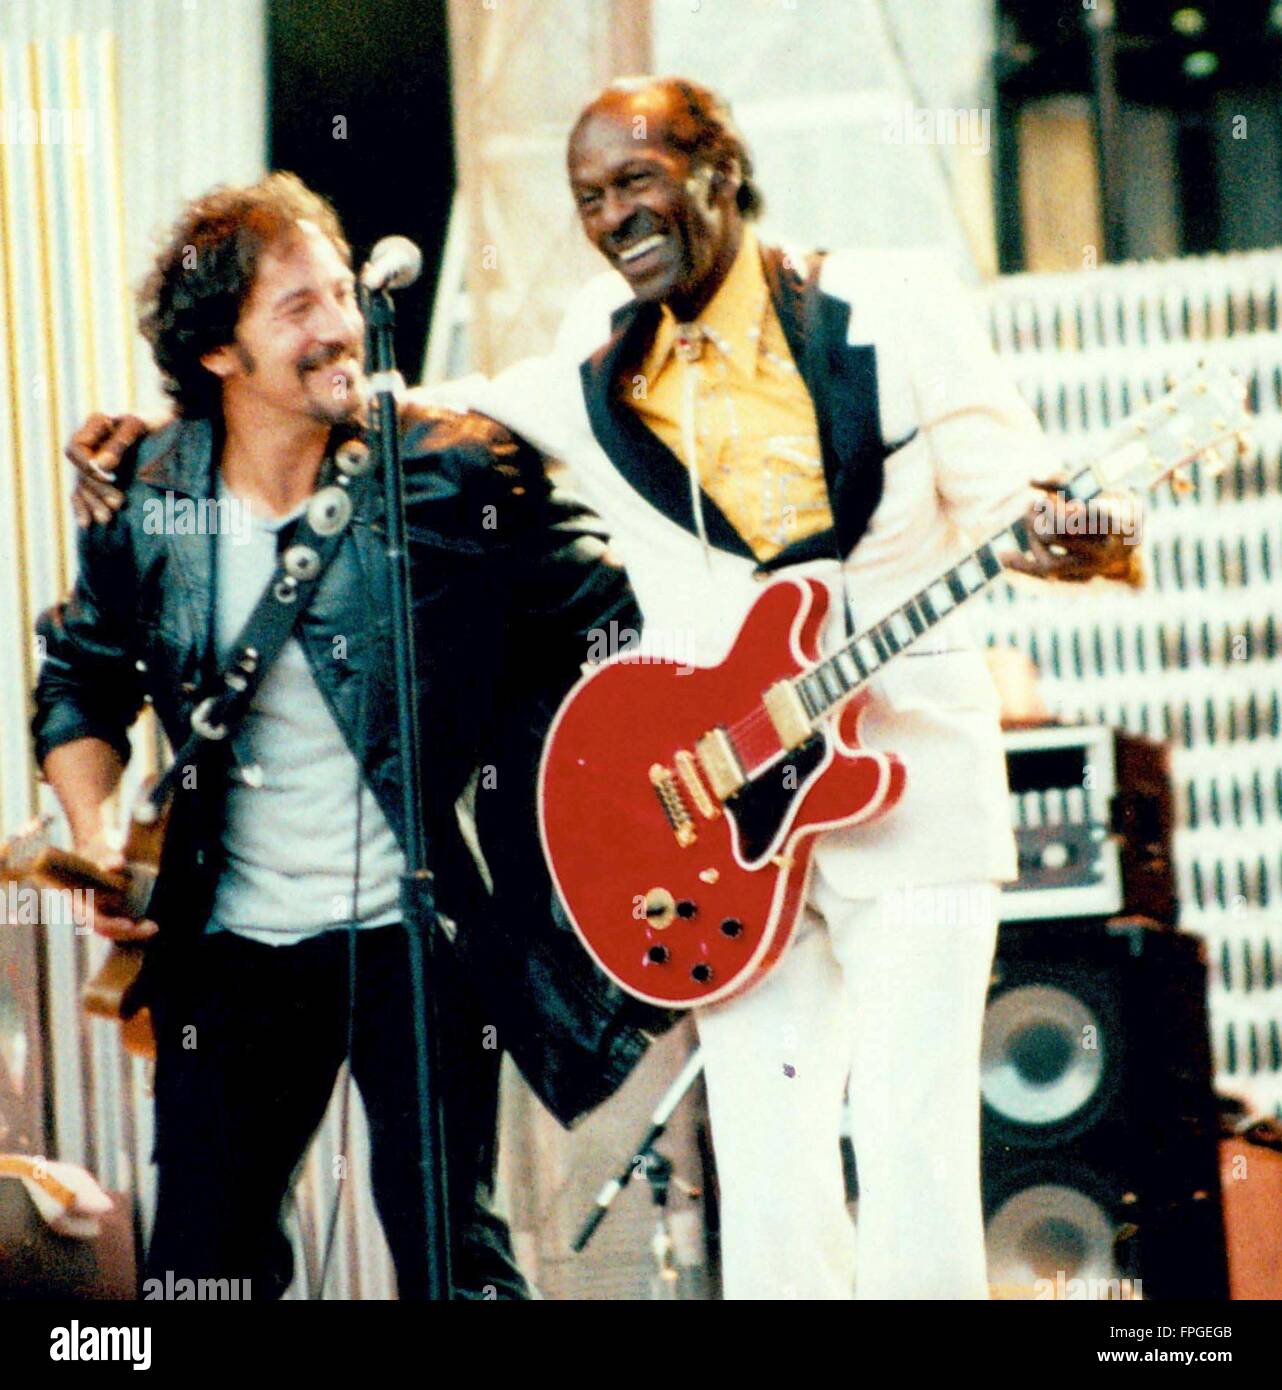 BRUCE SPRINGSTEEN, Chuck Berry CONCERT HALL OF FAME, Cleveland 09-02-1995 foto Michael Brito Foto Stock